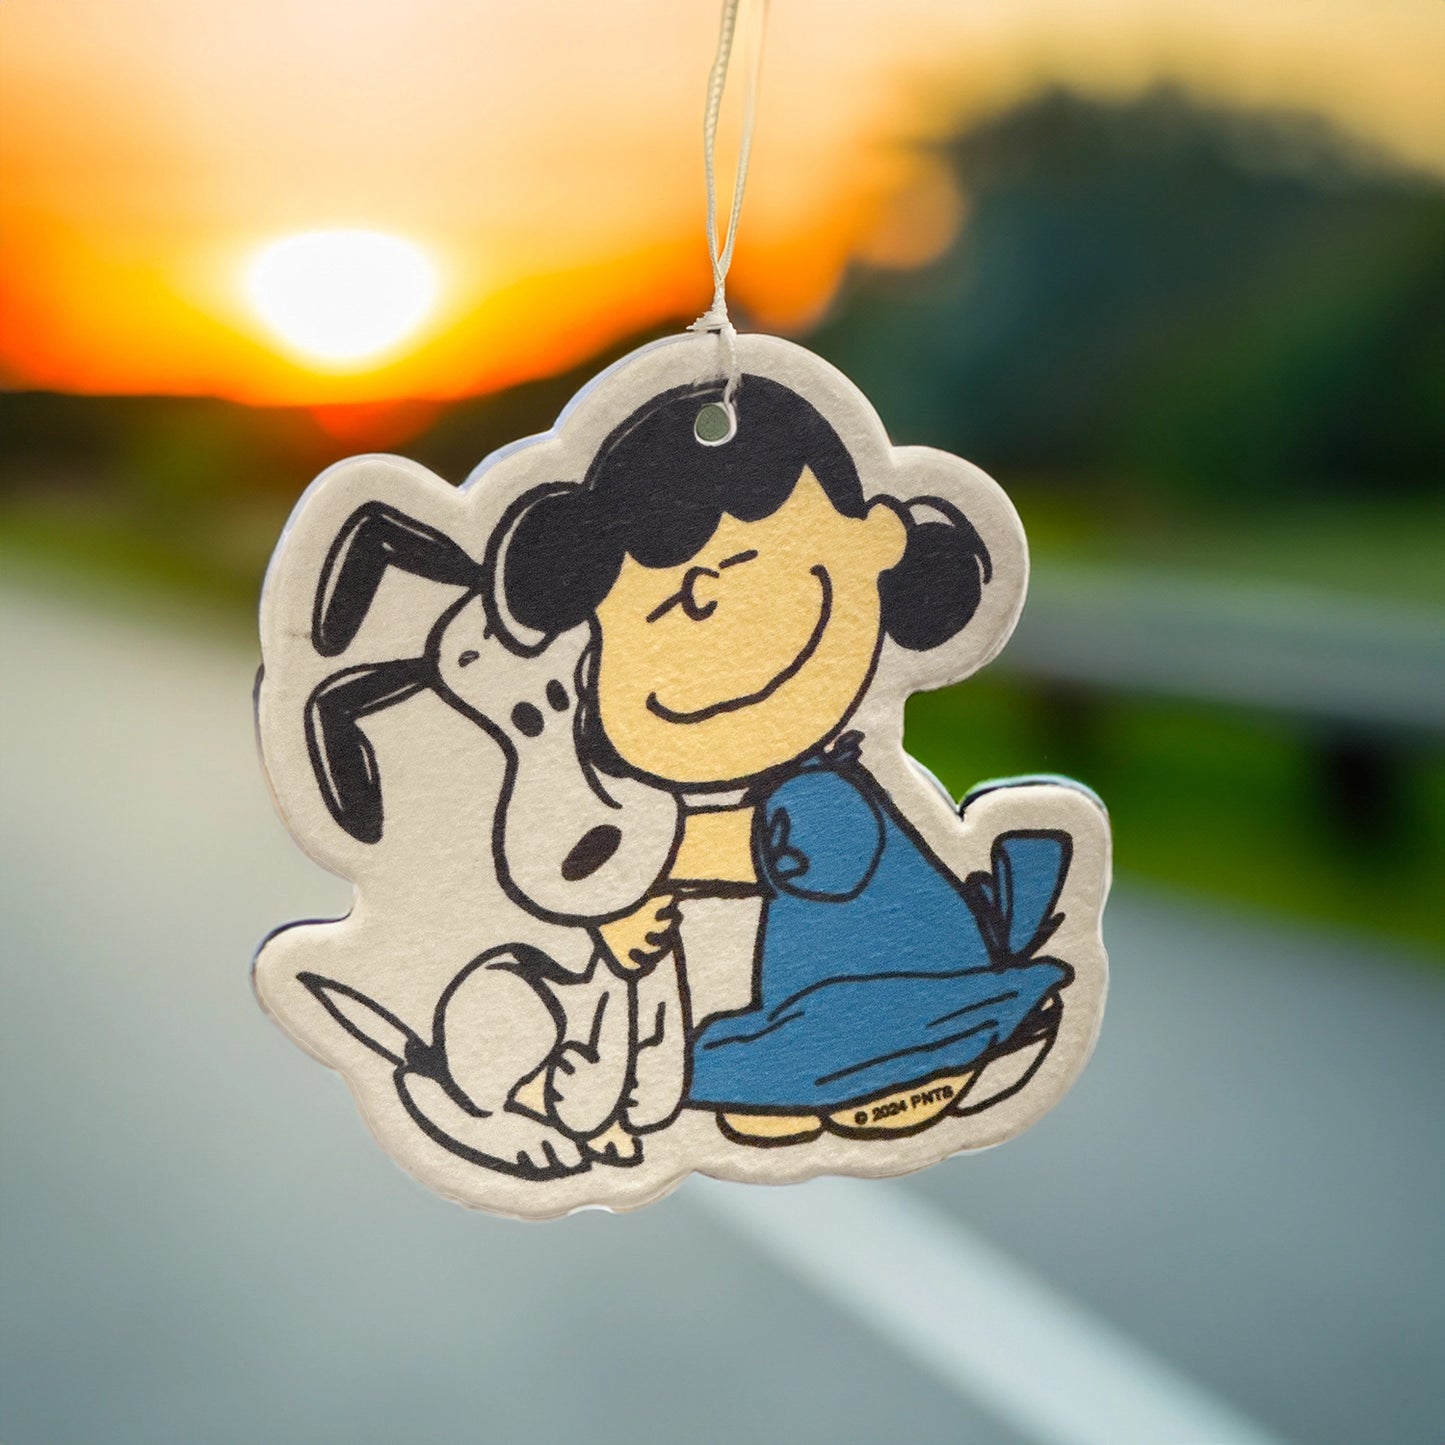 Snoopy Air Freshener ‘Lucy & Snoopy’ - Lavender Scent